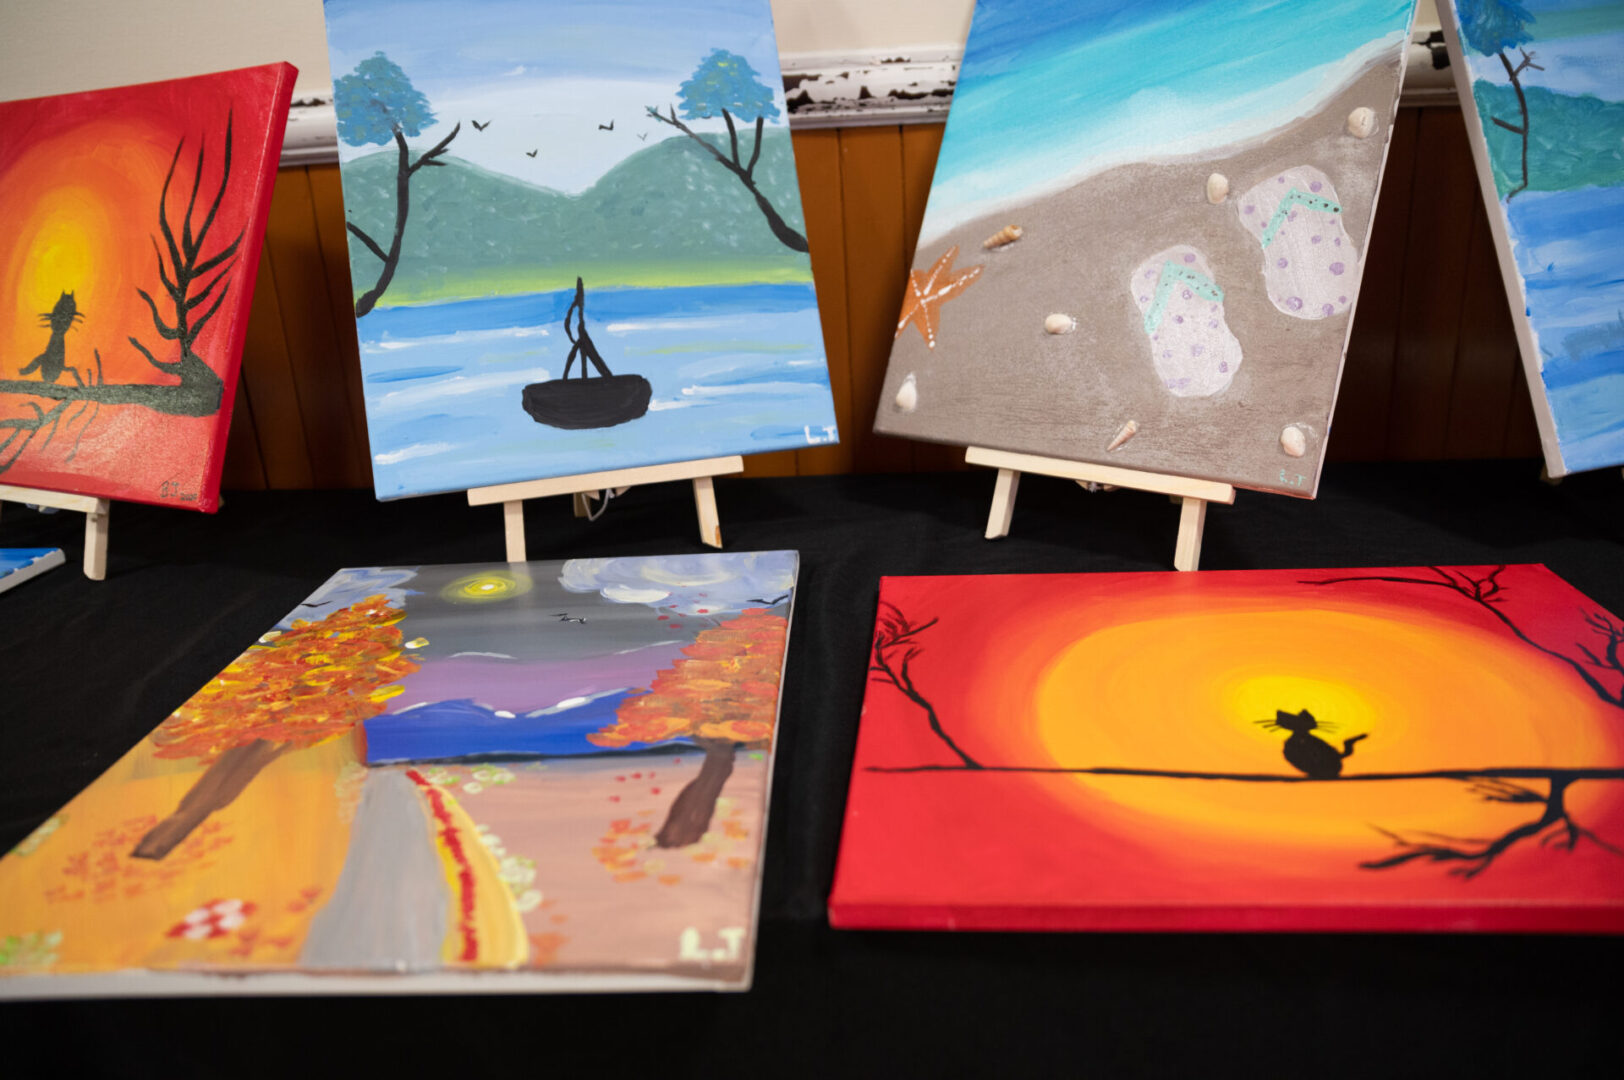 Six paintings displayed on the table